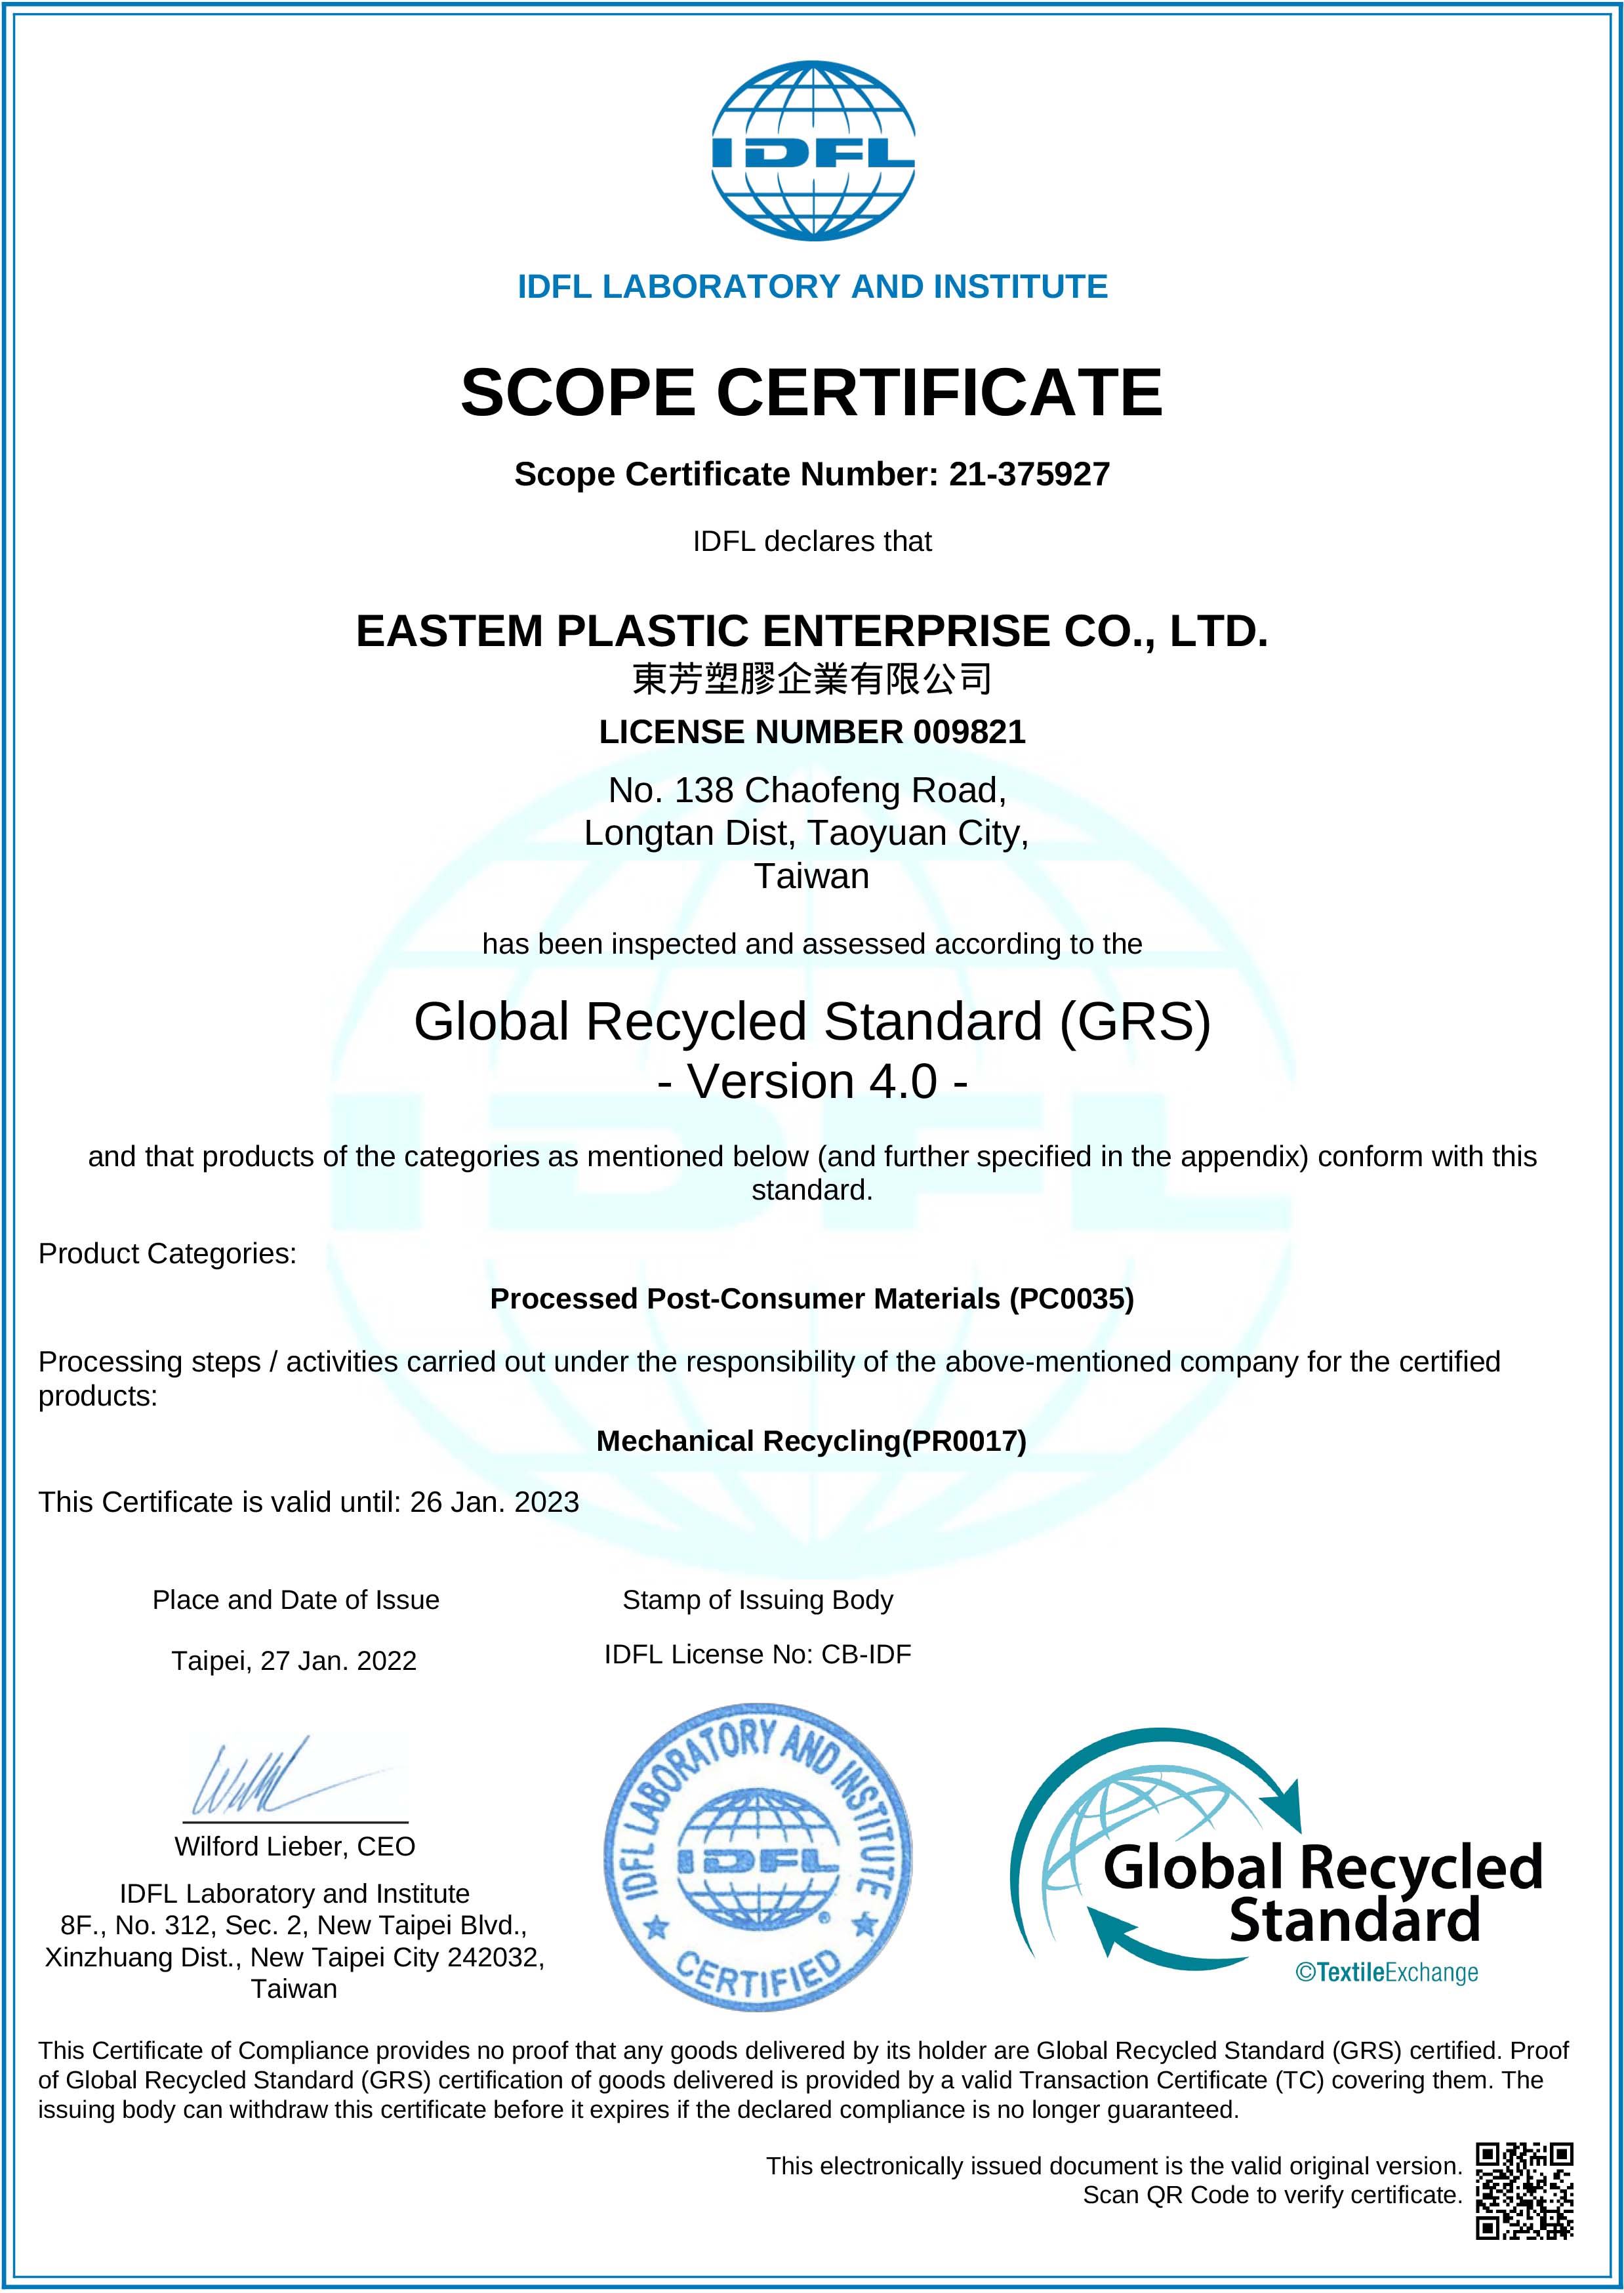 GLOBAL RECYCLED STANDARD(GRS)